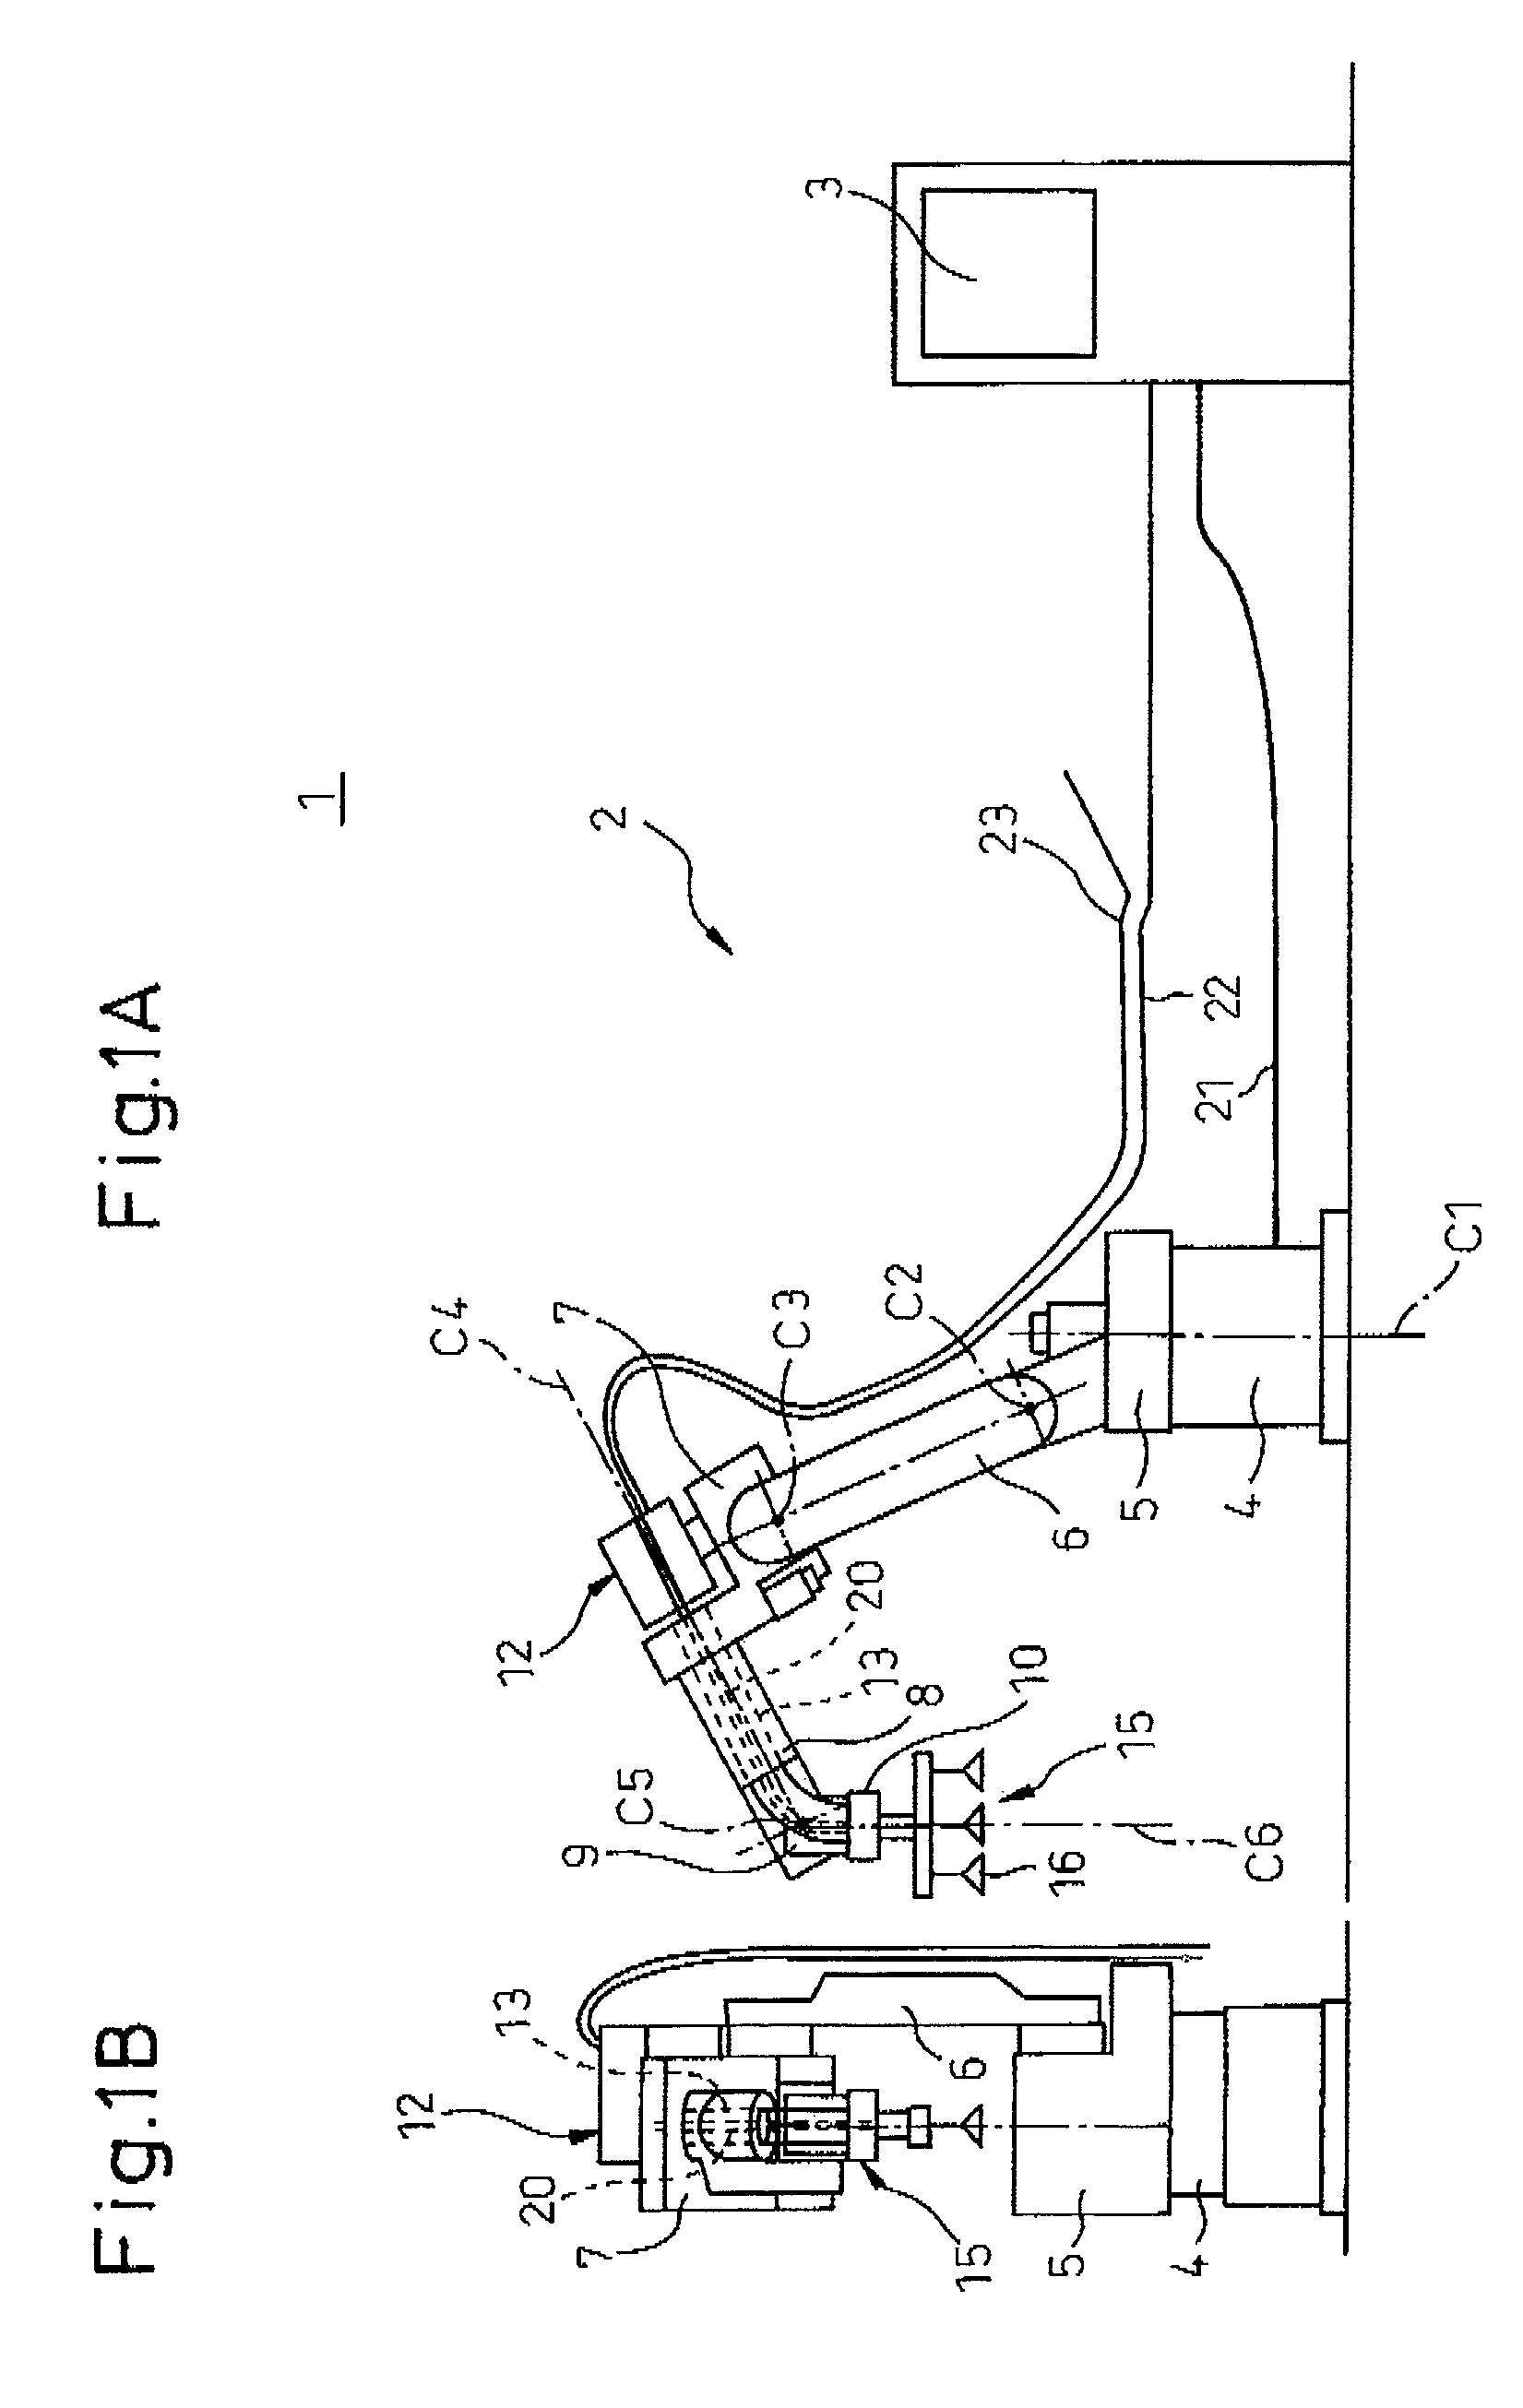 Umbilical-member processing structure for industrial robot